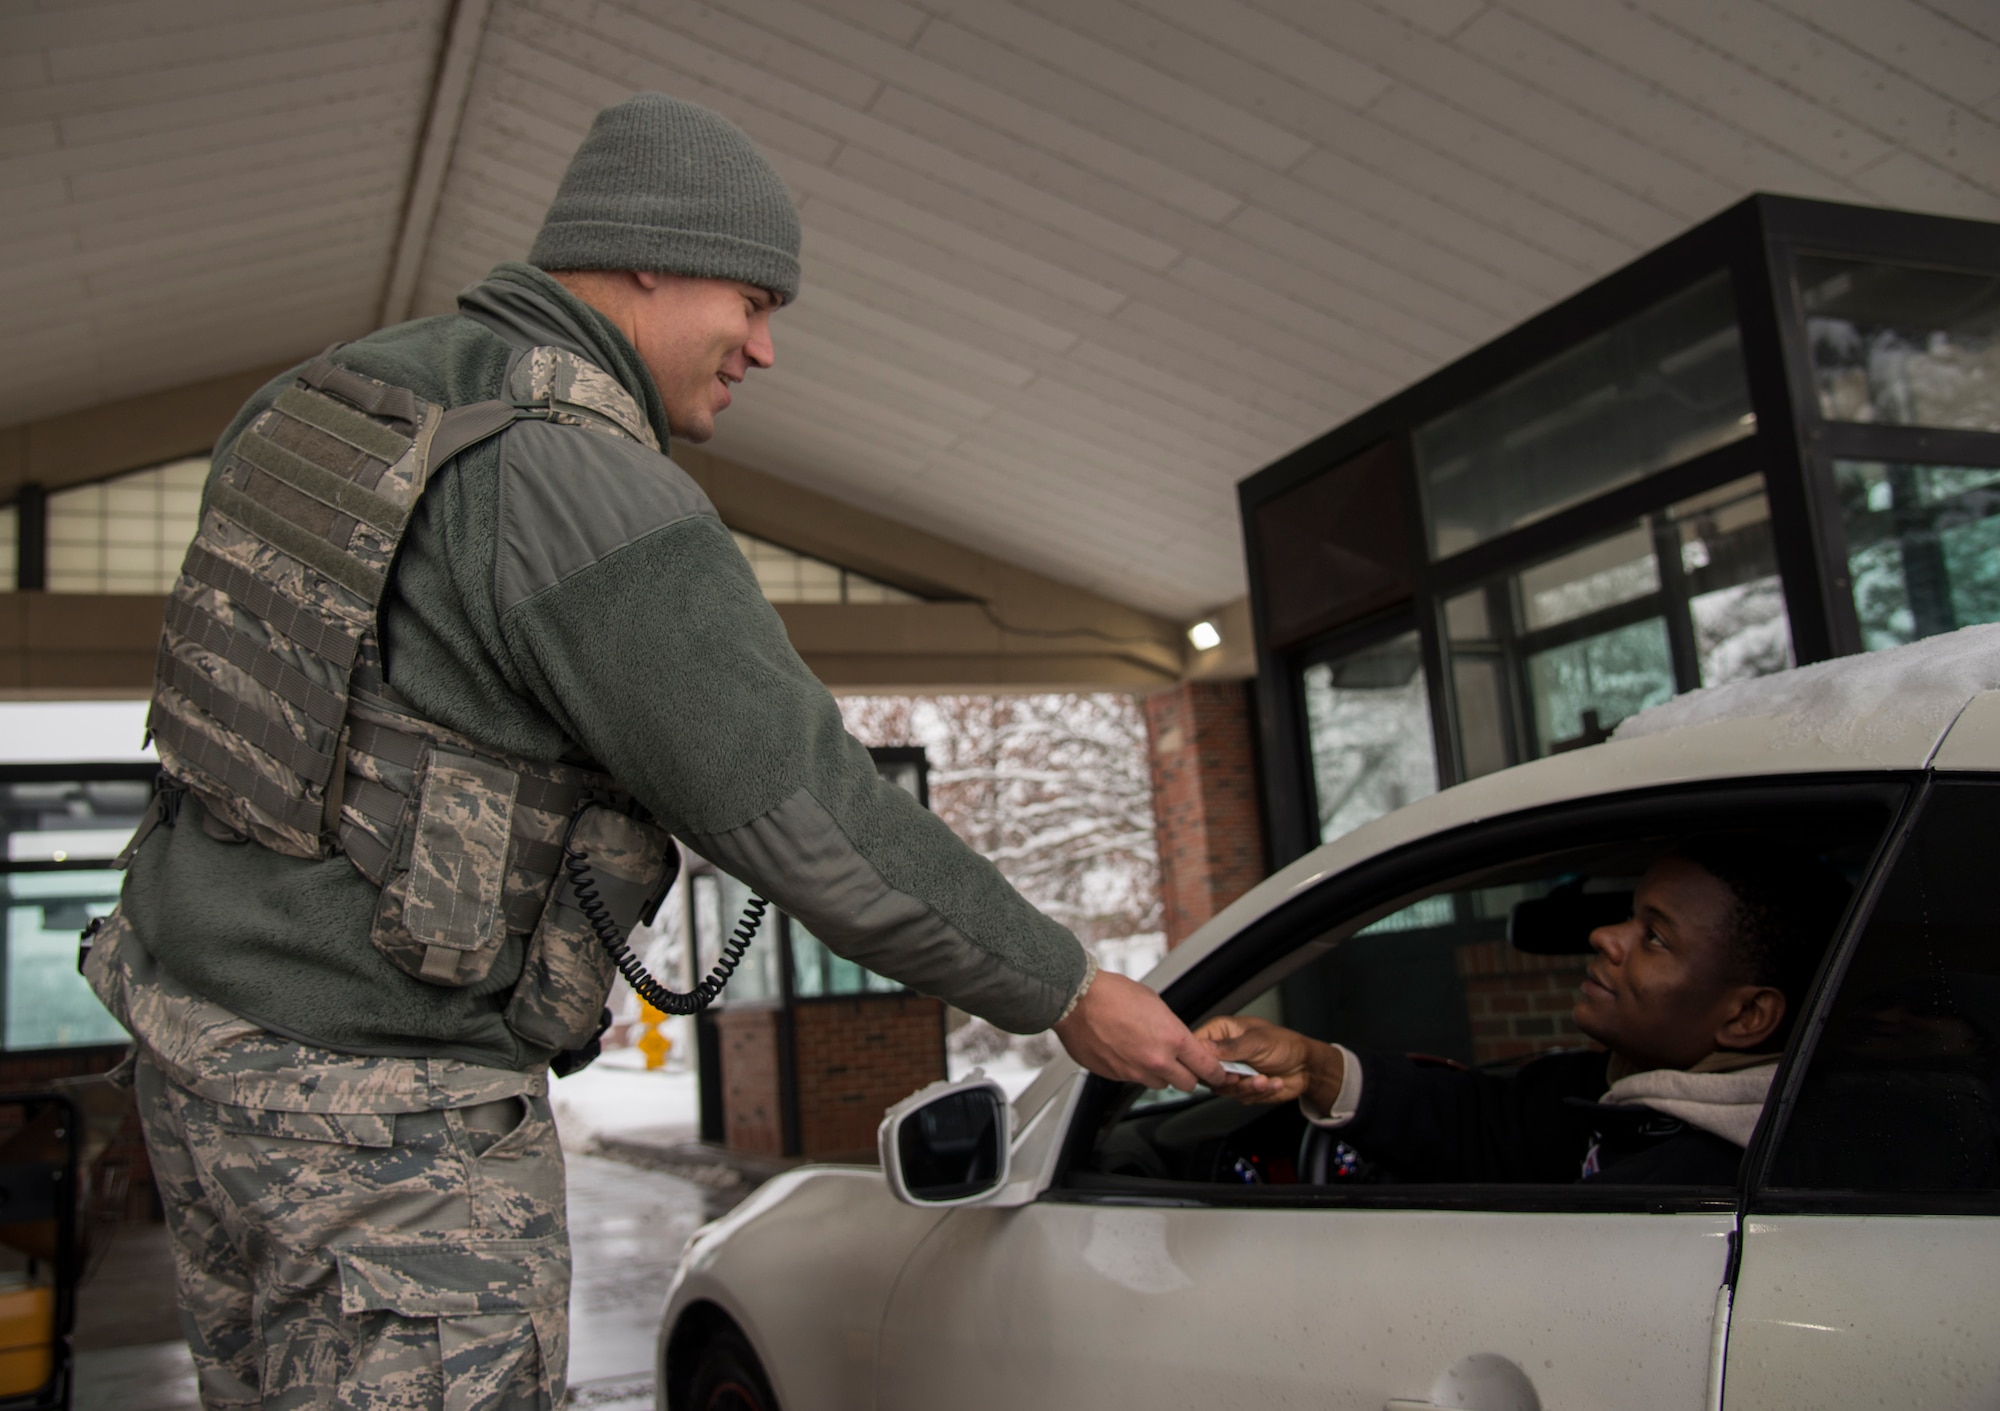 Senior Airman Jay Coil, 375th Security Forces Squadron patrolman, checks an ID card at the Belleville gate Jan. 12, 2019 at Scott Air Force, Ill. Members of the 375th SFS are mission essential personnel and still must ensure the safety and security of the base even during a snow storm.